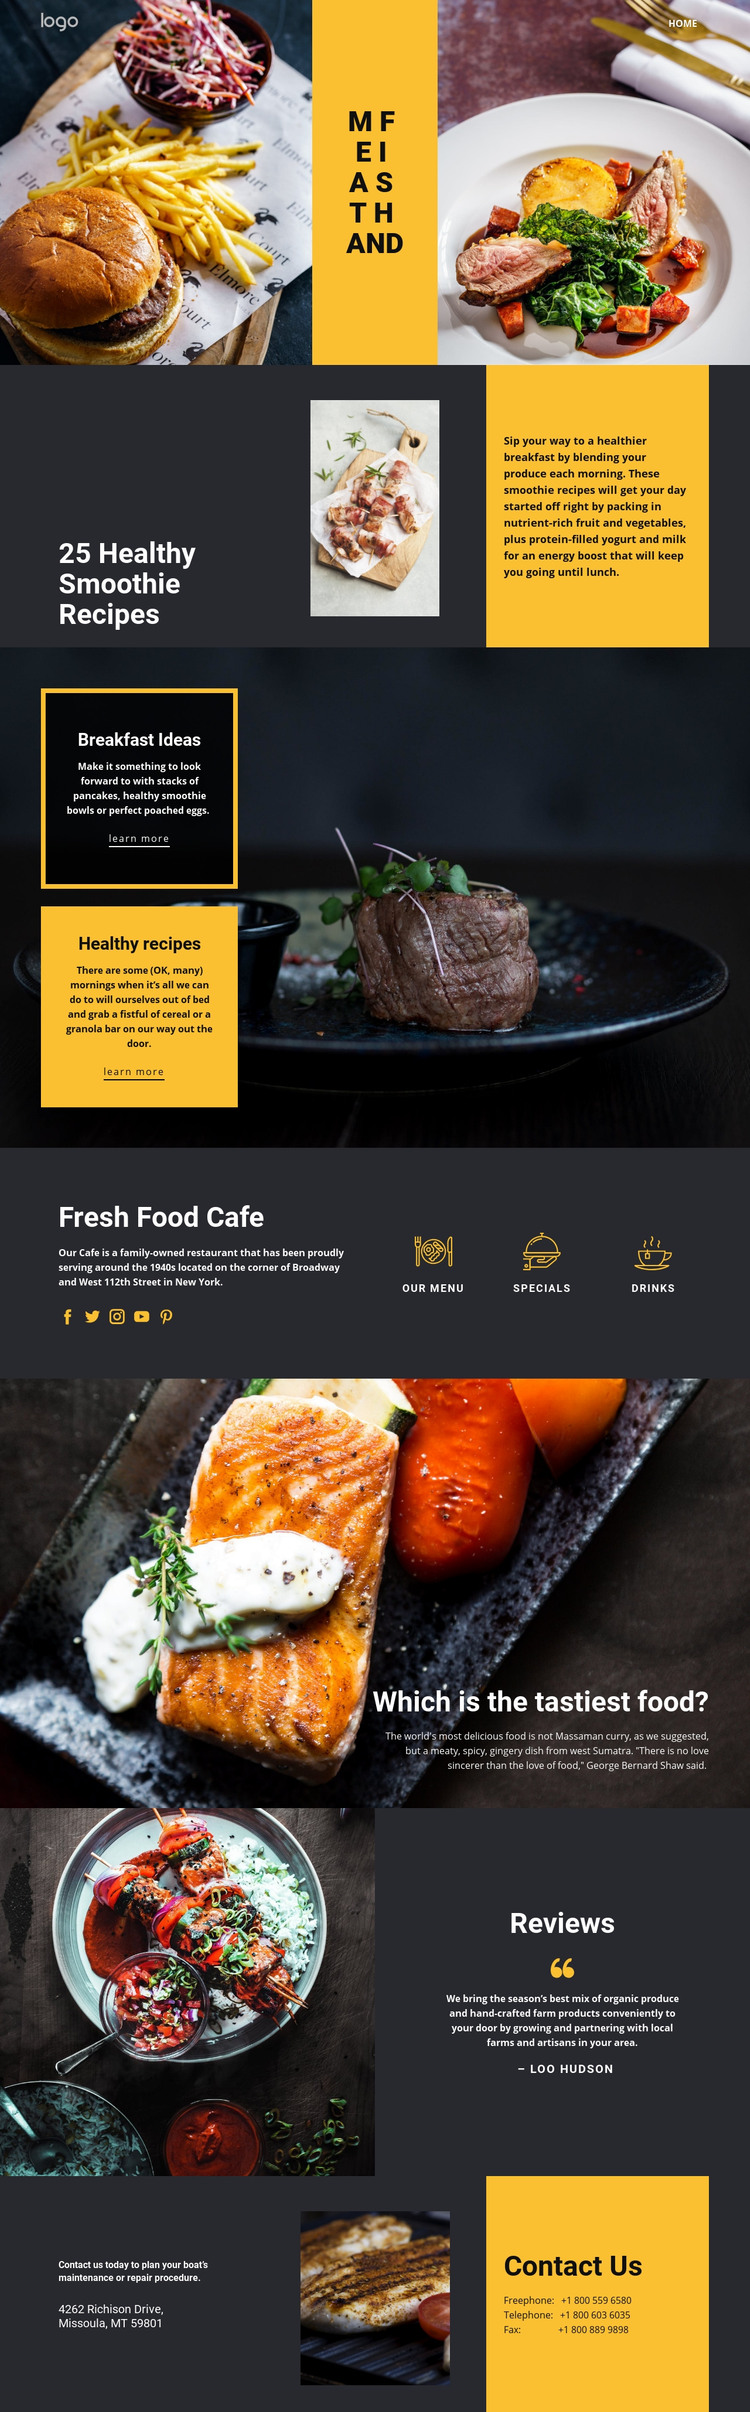 Good recipes for good food Homepage Design